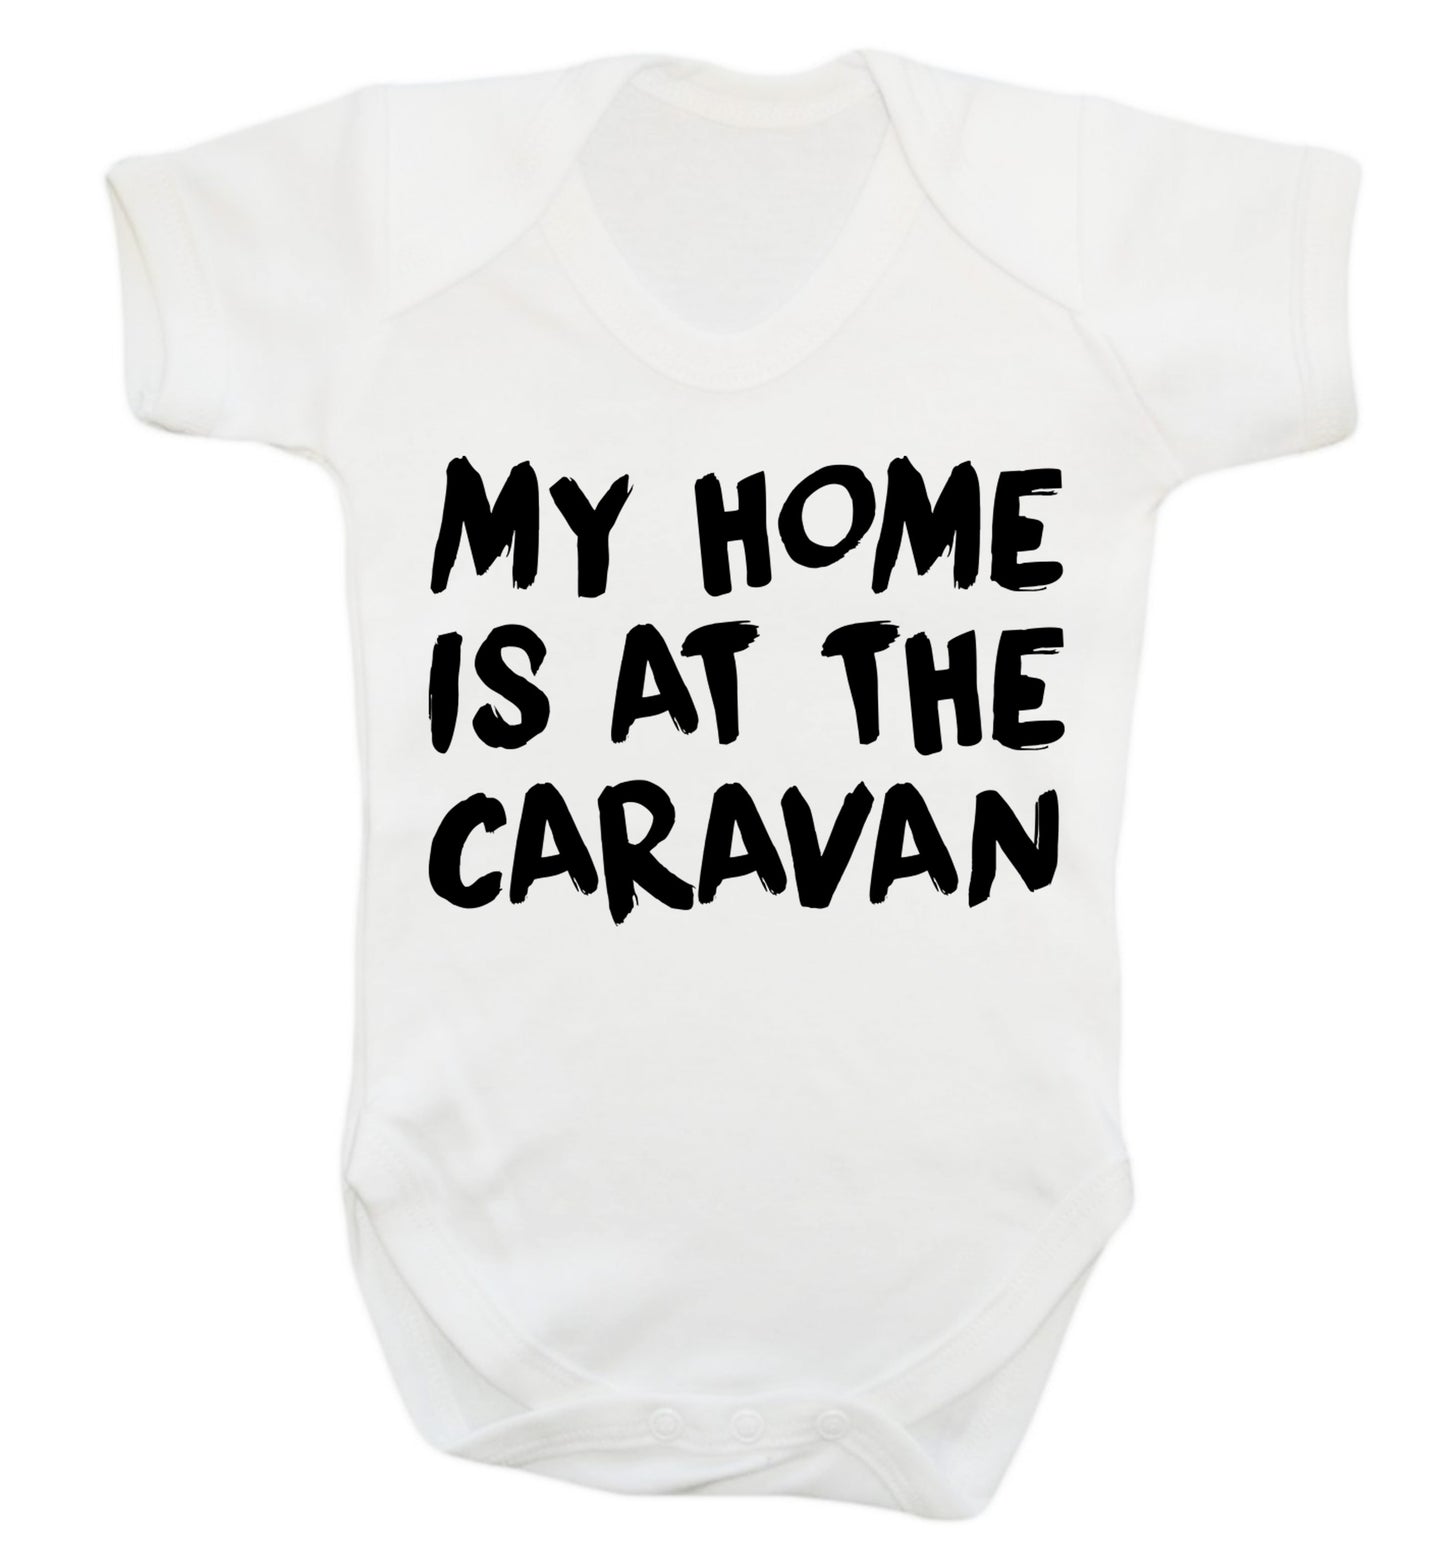 My home is at the caravan Baby Vest white 18-24 months